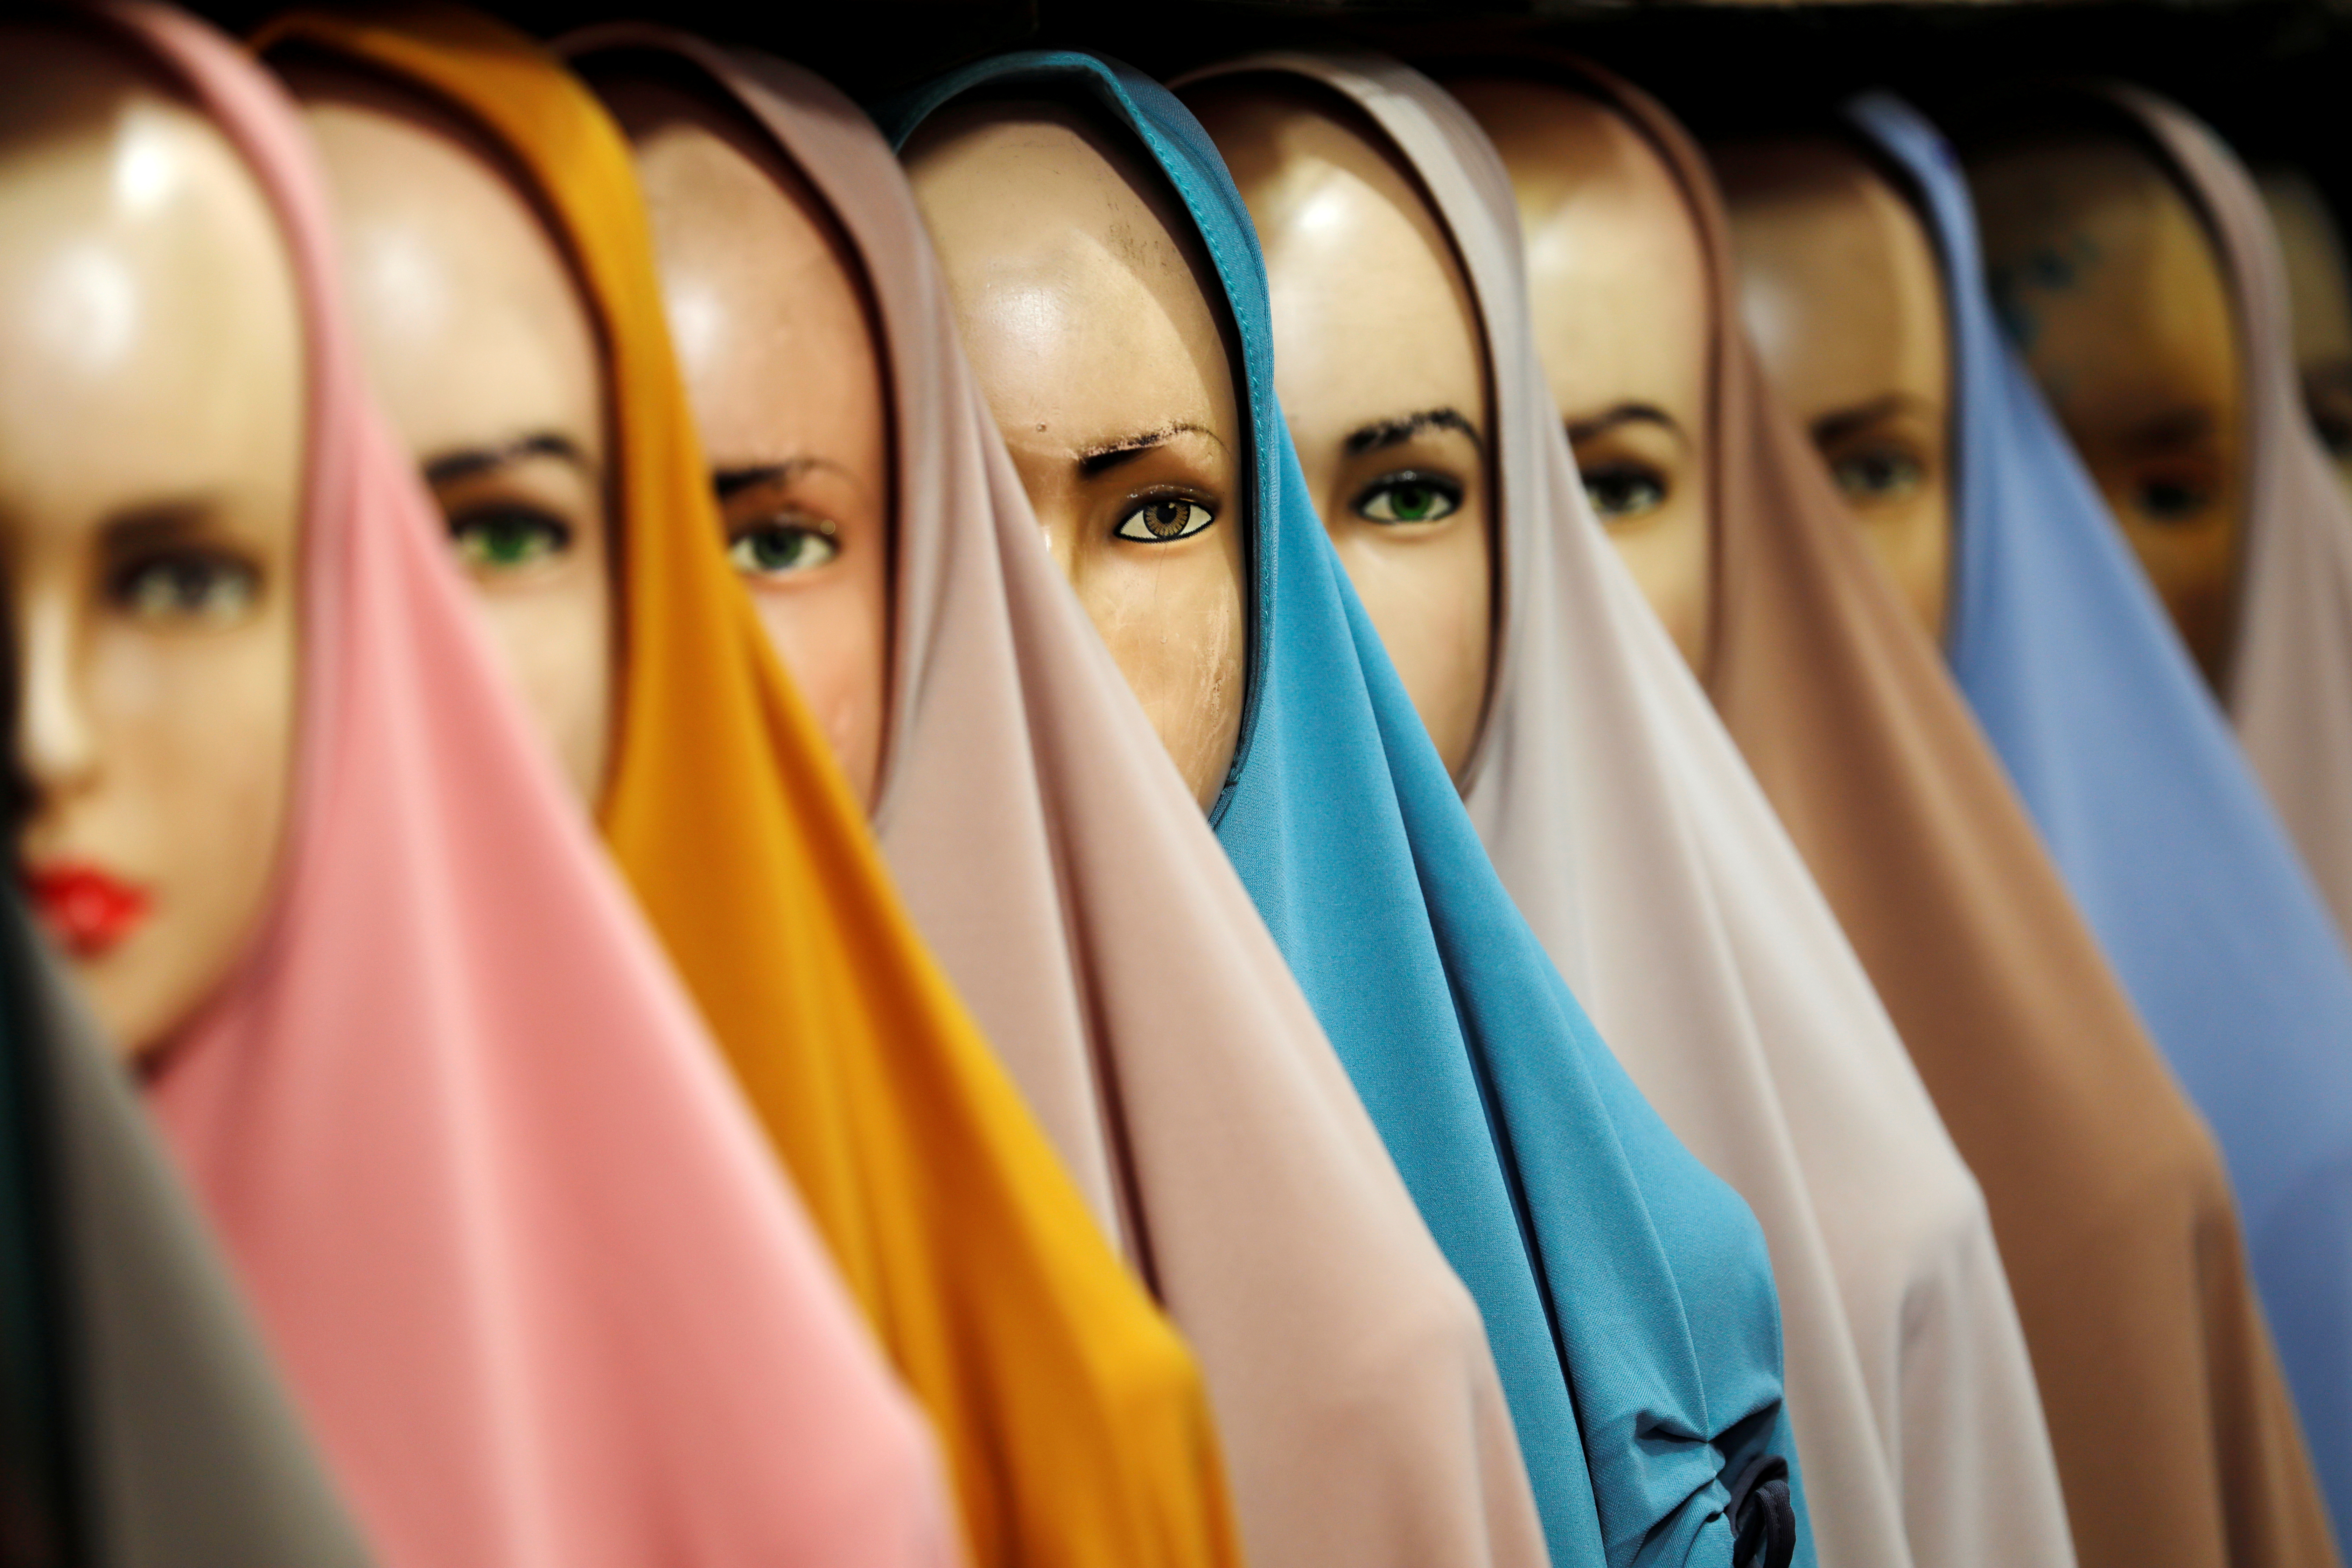 Hijabs for sale are pictured at a stall of Tanah Abang textile market in Jakarta